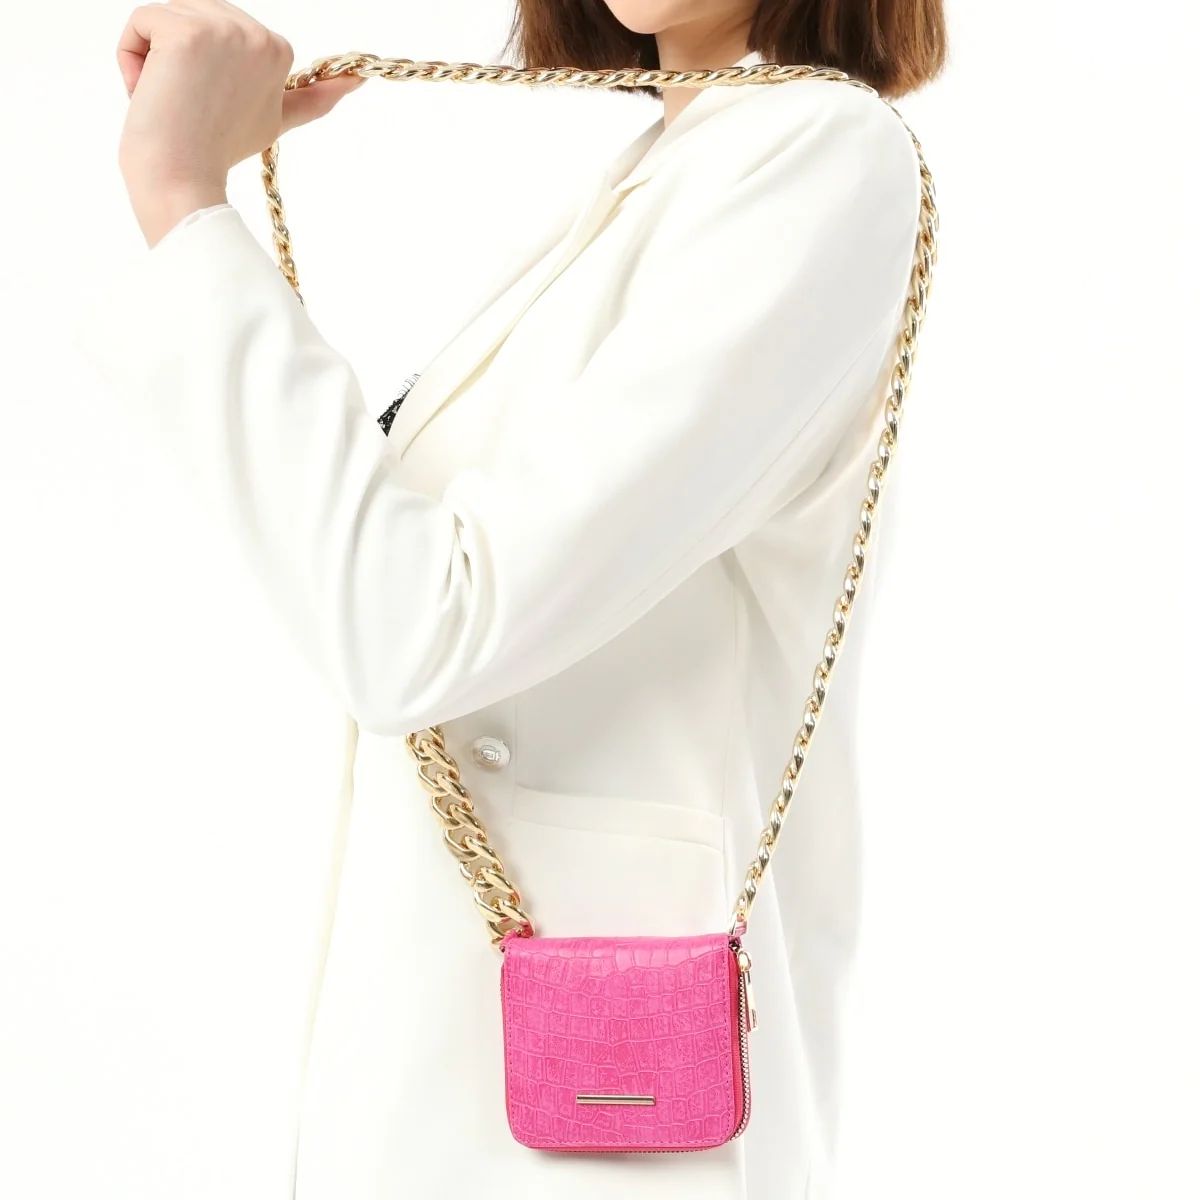 she's convenient leather chain holder wallet pink